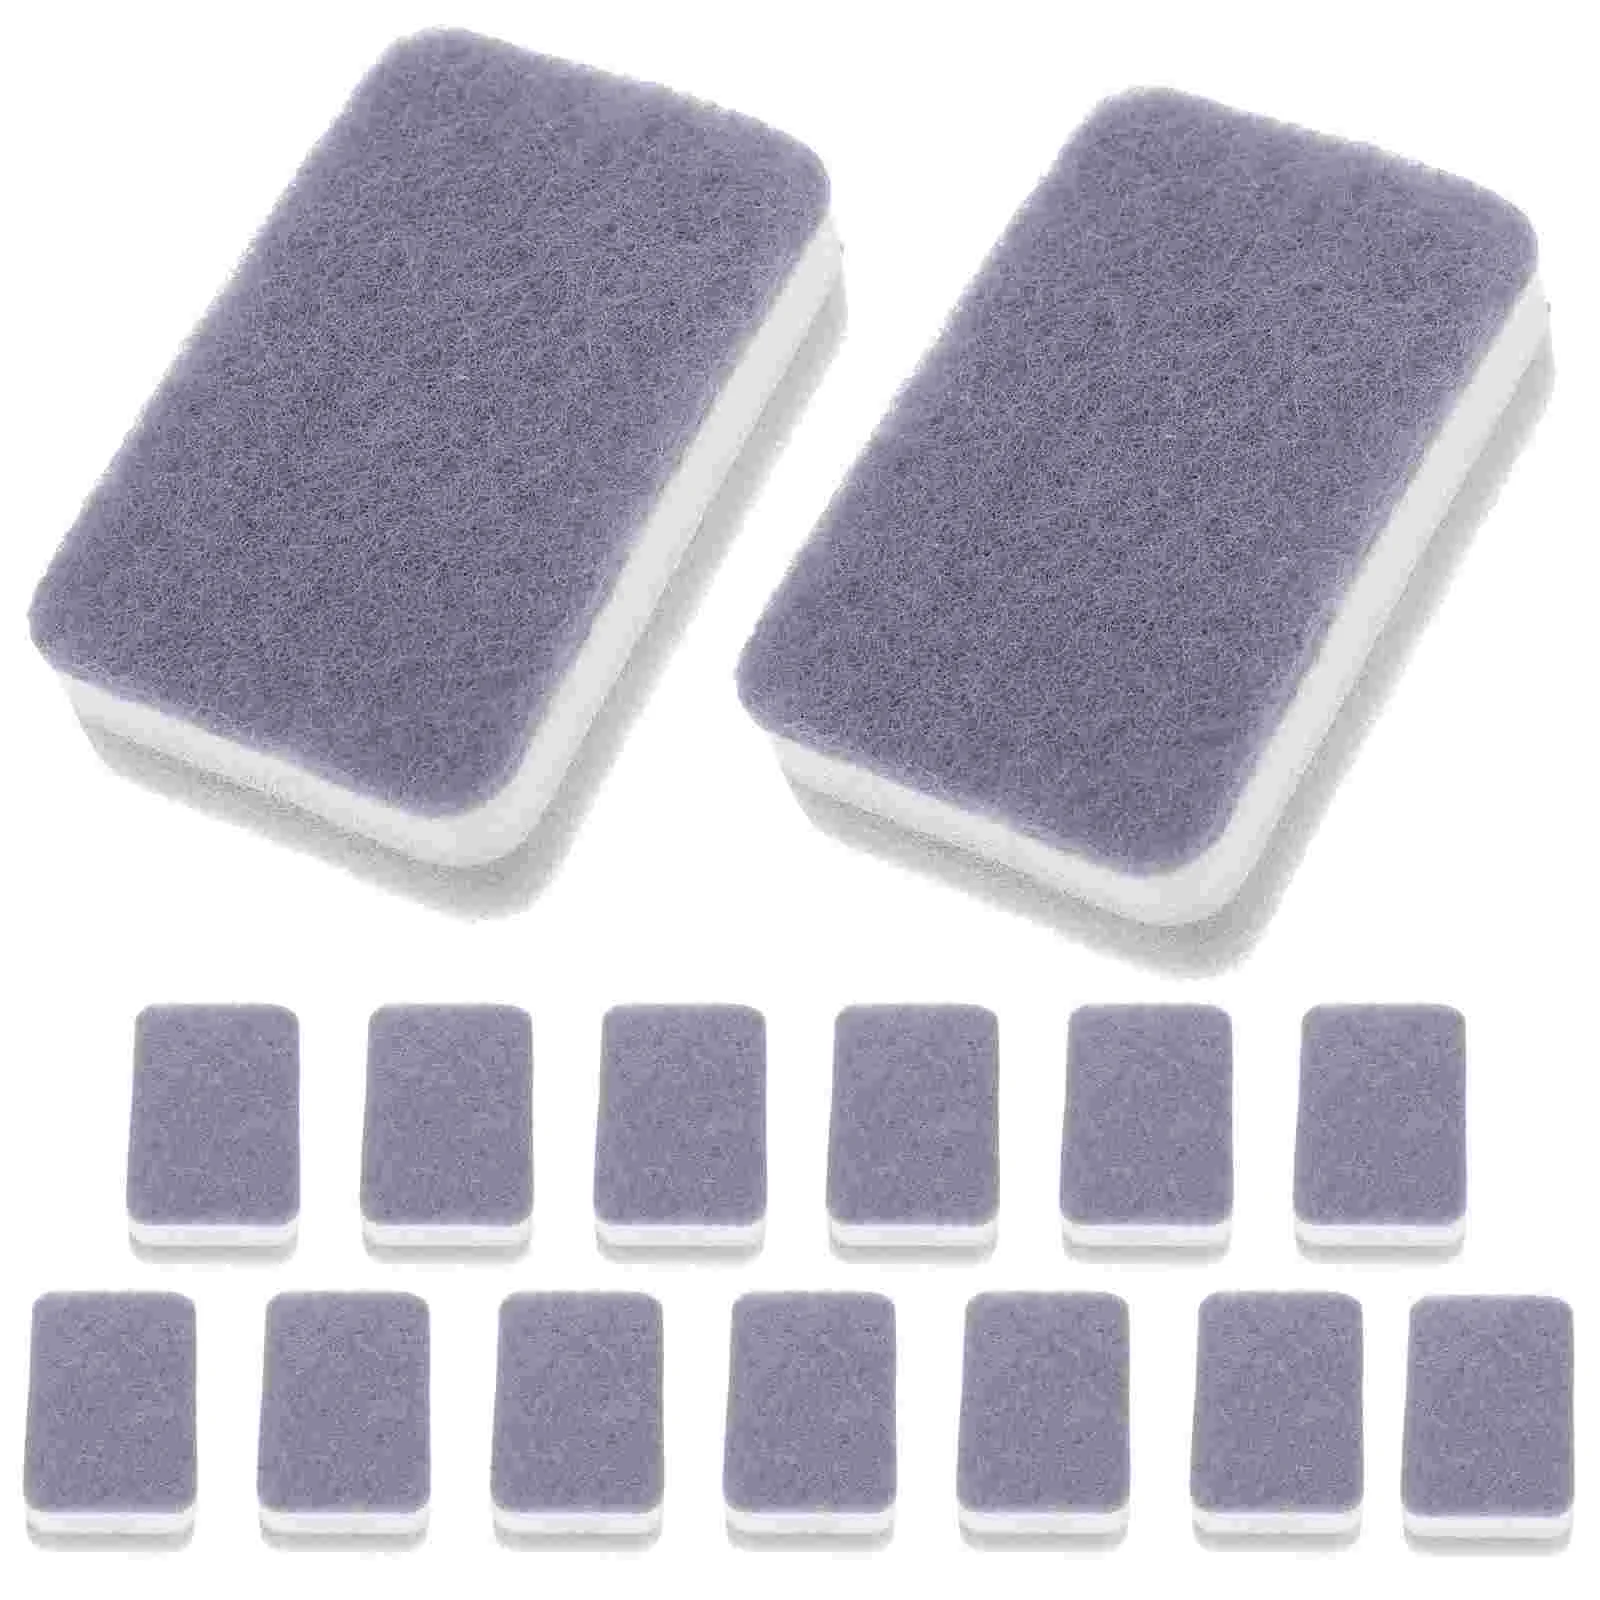 

15 Pcs Scrub Sponge Dishwashing Silicone Utensils Scouring Pads Cookware Home Cleaning Product Kitchen Wipes Scrubber